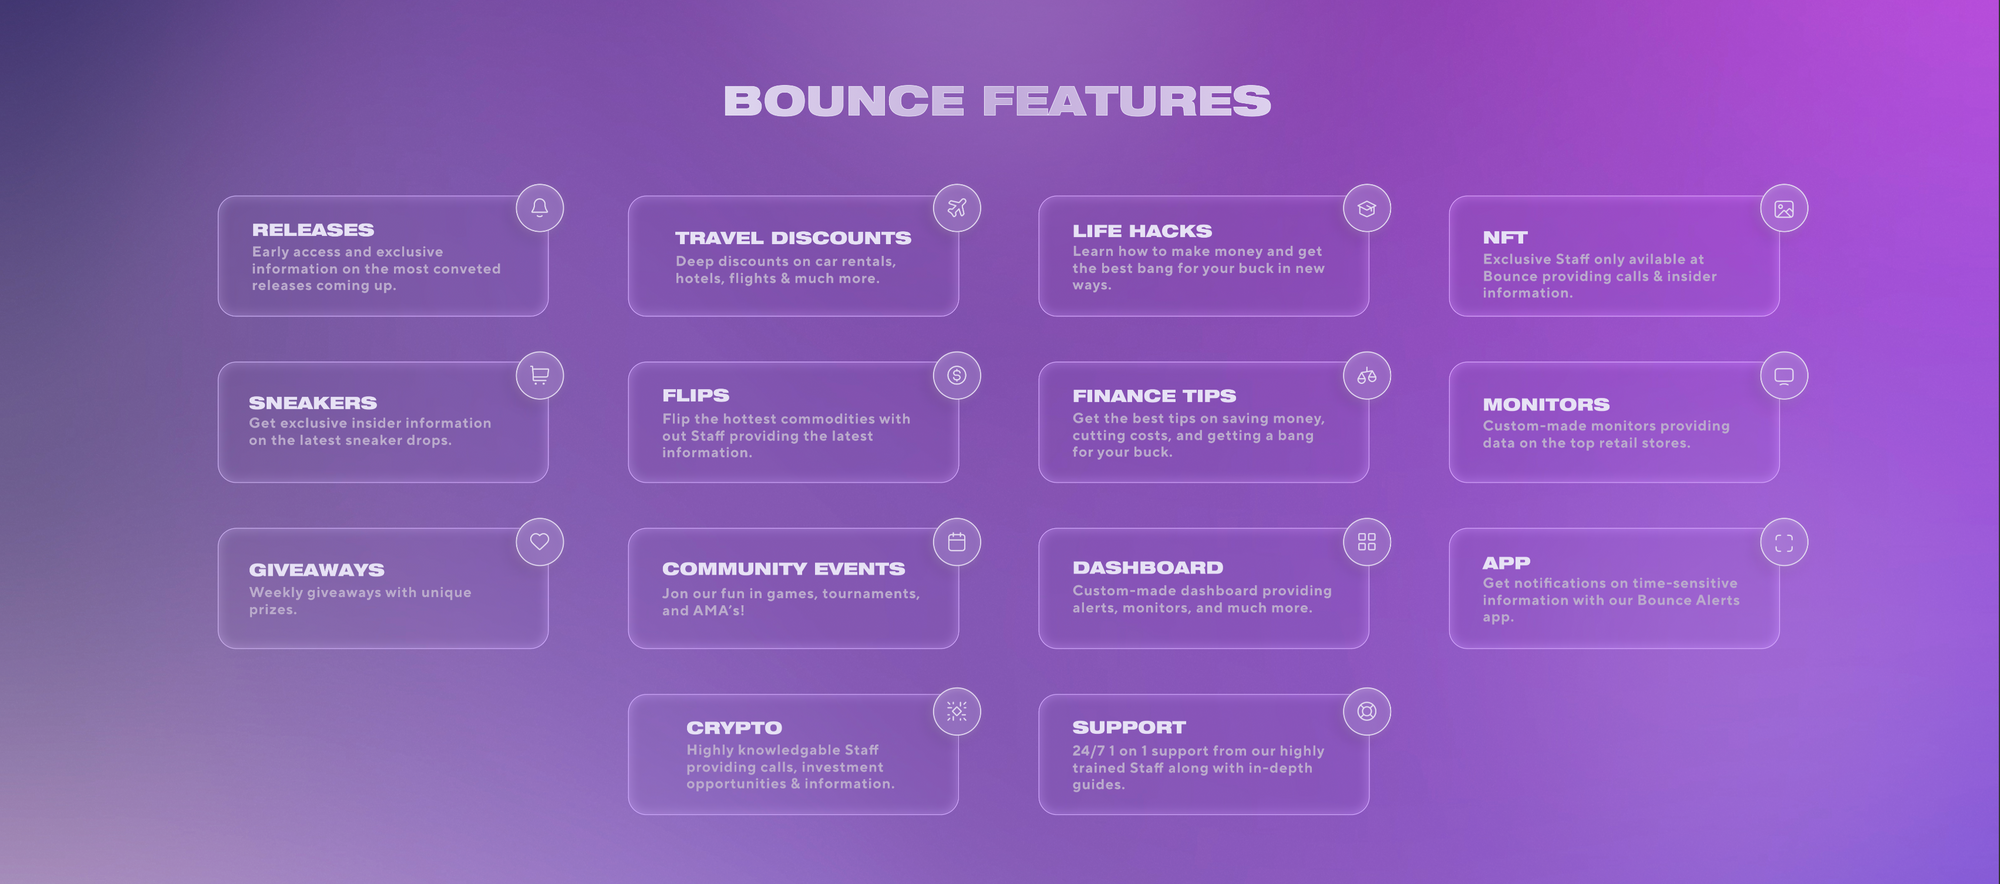 Bounce Features Graphic